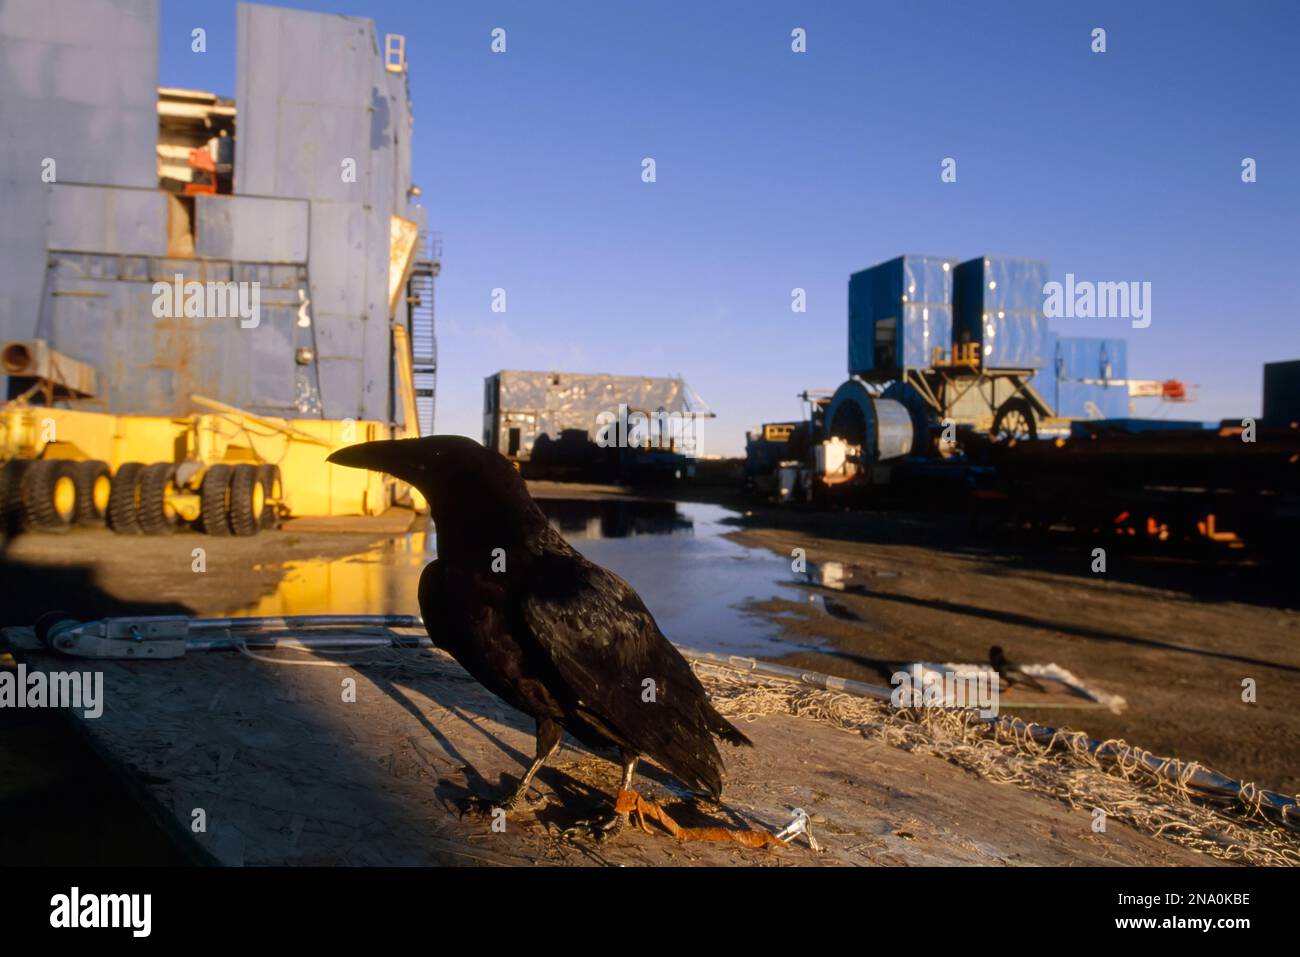 A crow tethered to a barge in the North Slope area, Alaska, USA; North Slope, Alaska, United States of America Stock Photo